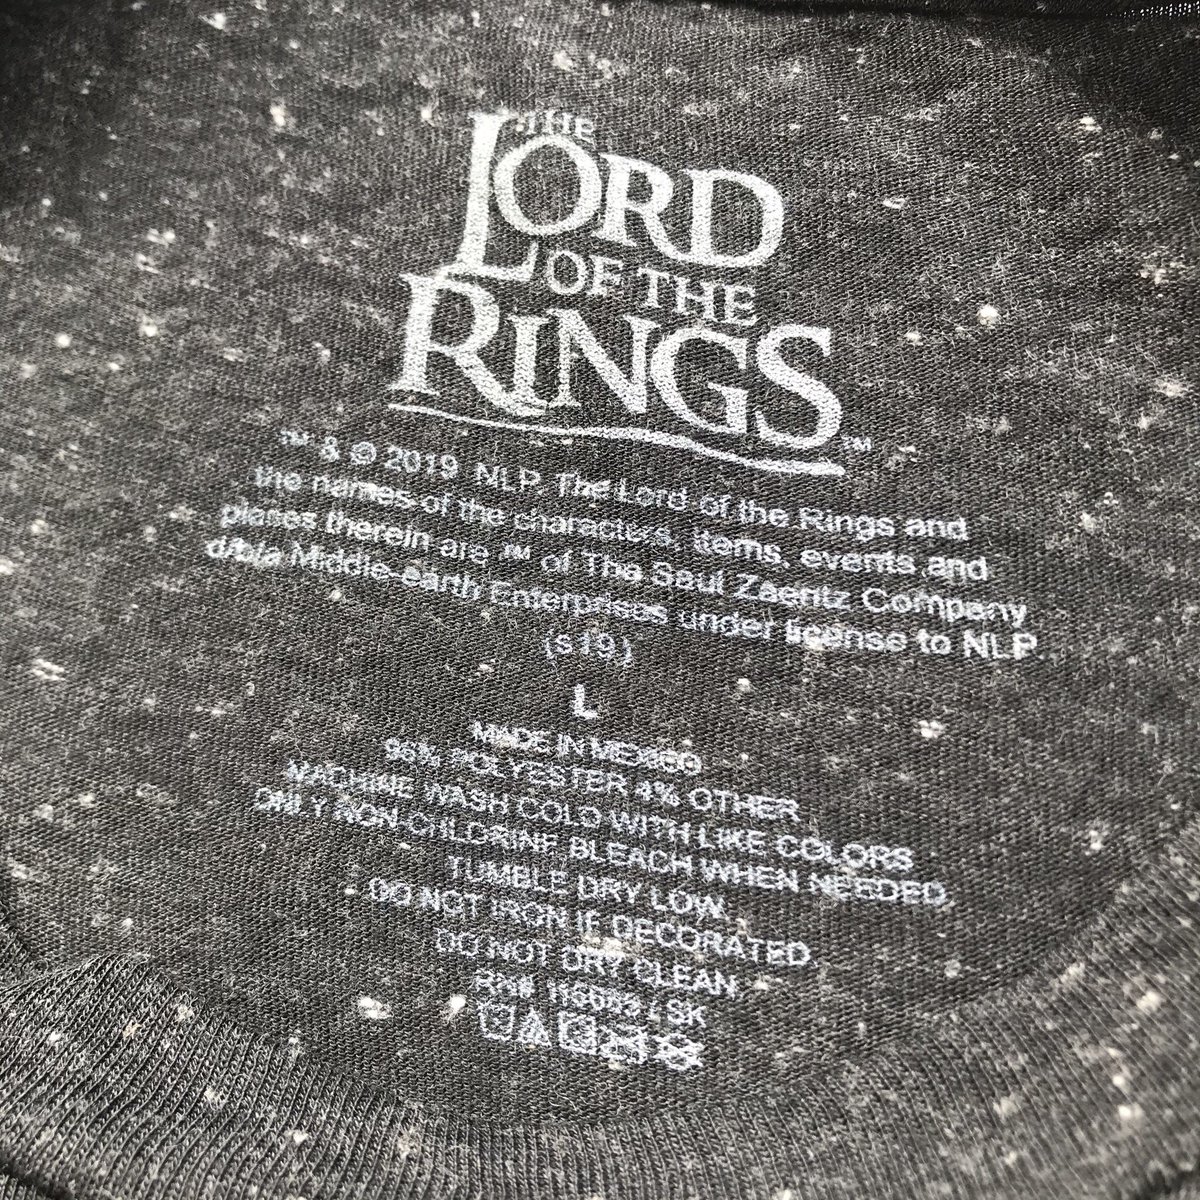 The Lord of The Rings
Size: L // 21x30
Price: 350
*ใหม่มือ1 เข้ม แน่น* 

#thelordoftherings #thelordoftheringstee #secondhandthailand #thaishop #thaihypebeast #soul4street #movietees #movietee